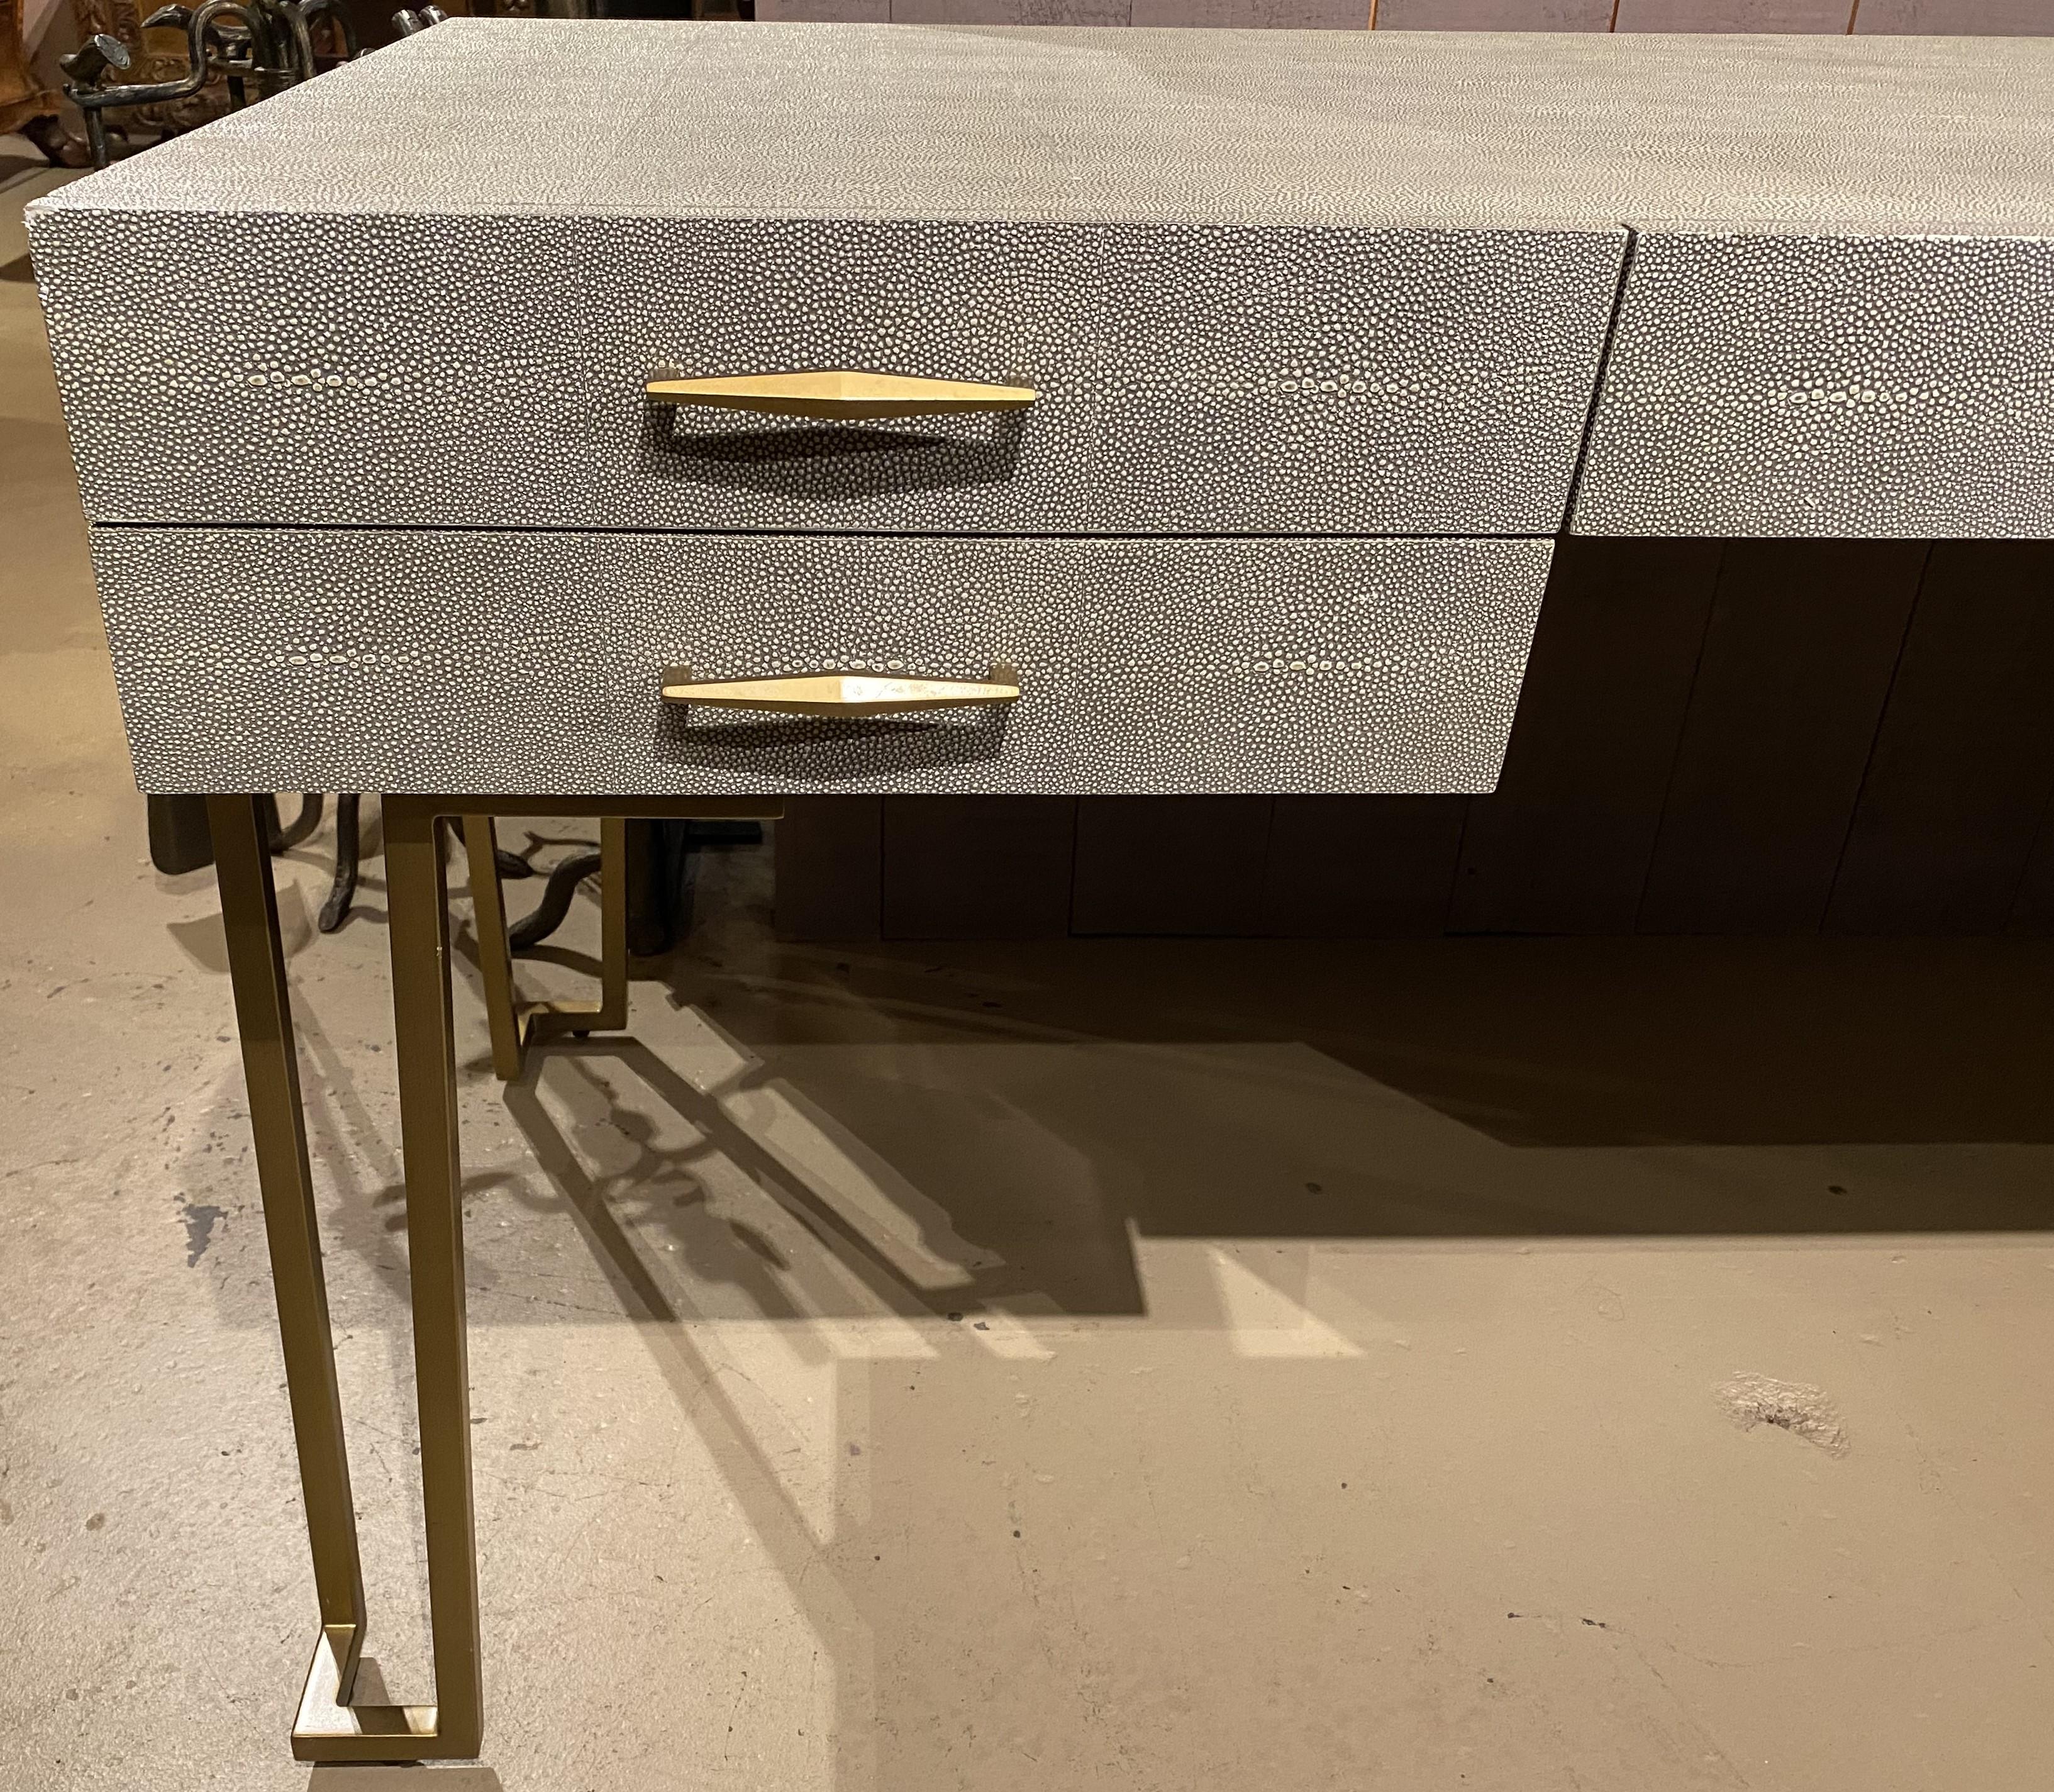 A sleek five drawer modern Morand grand desk in faux shagreen and sorrel gray by Interlude from the Interlude Home Collection, based in Trumbull, Connecticut, with brushed brass legs and hardware, and a manufacturer’s brass tag inside top left